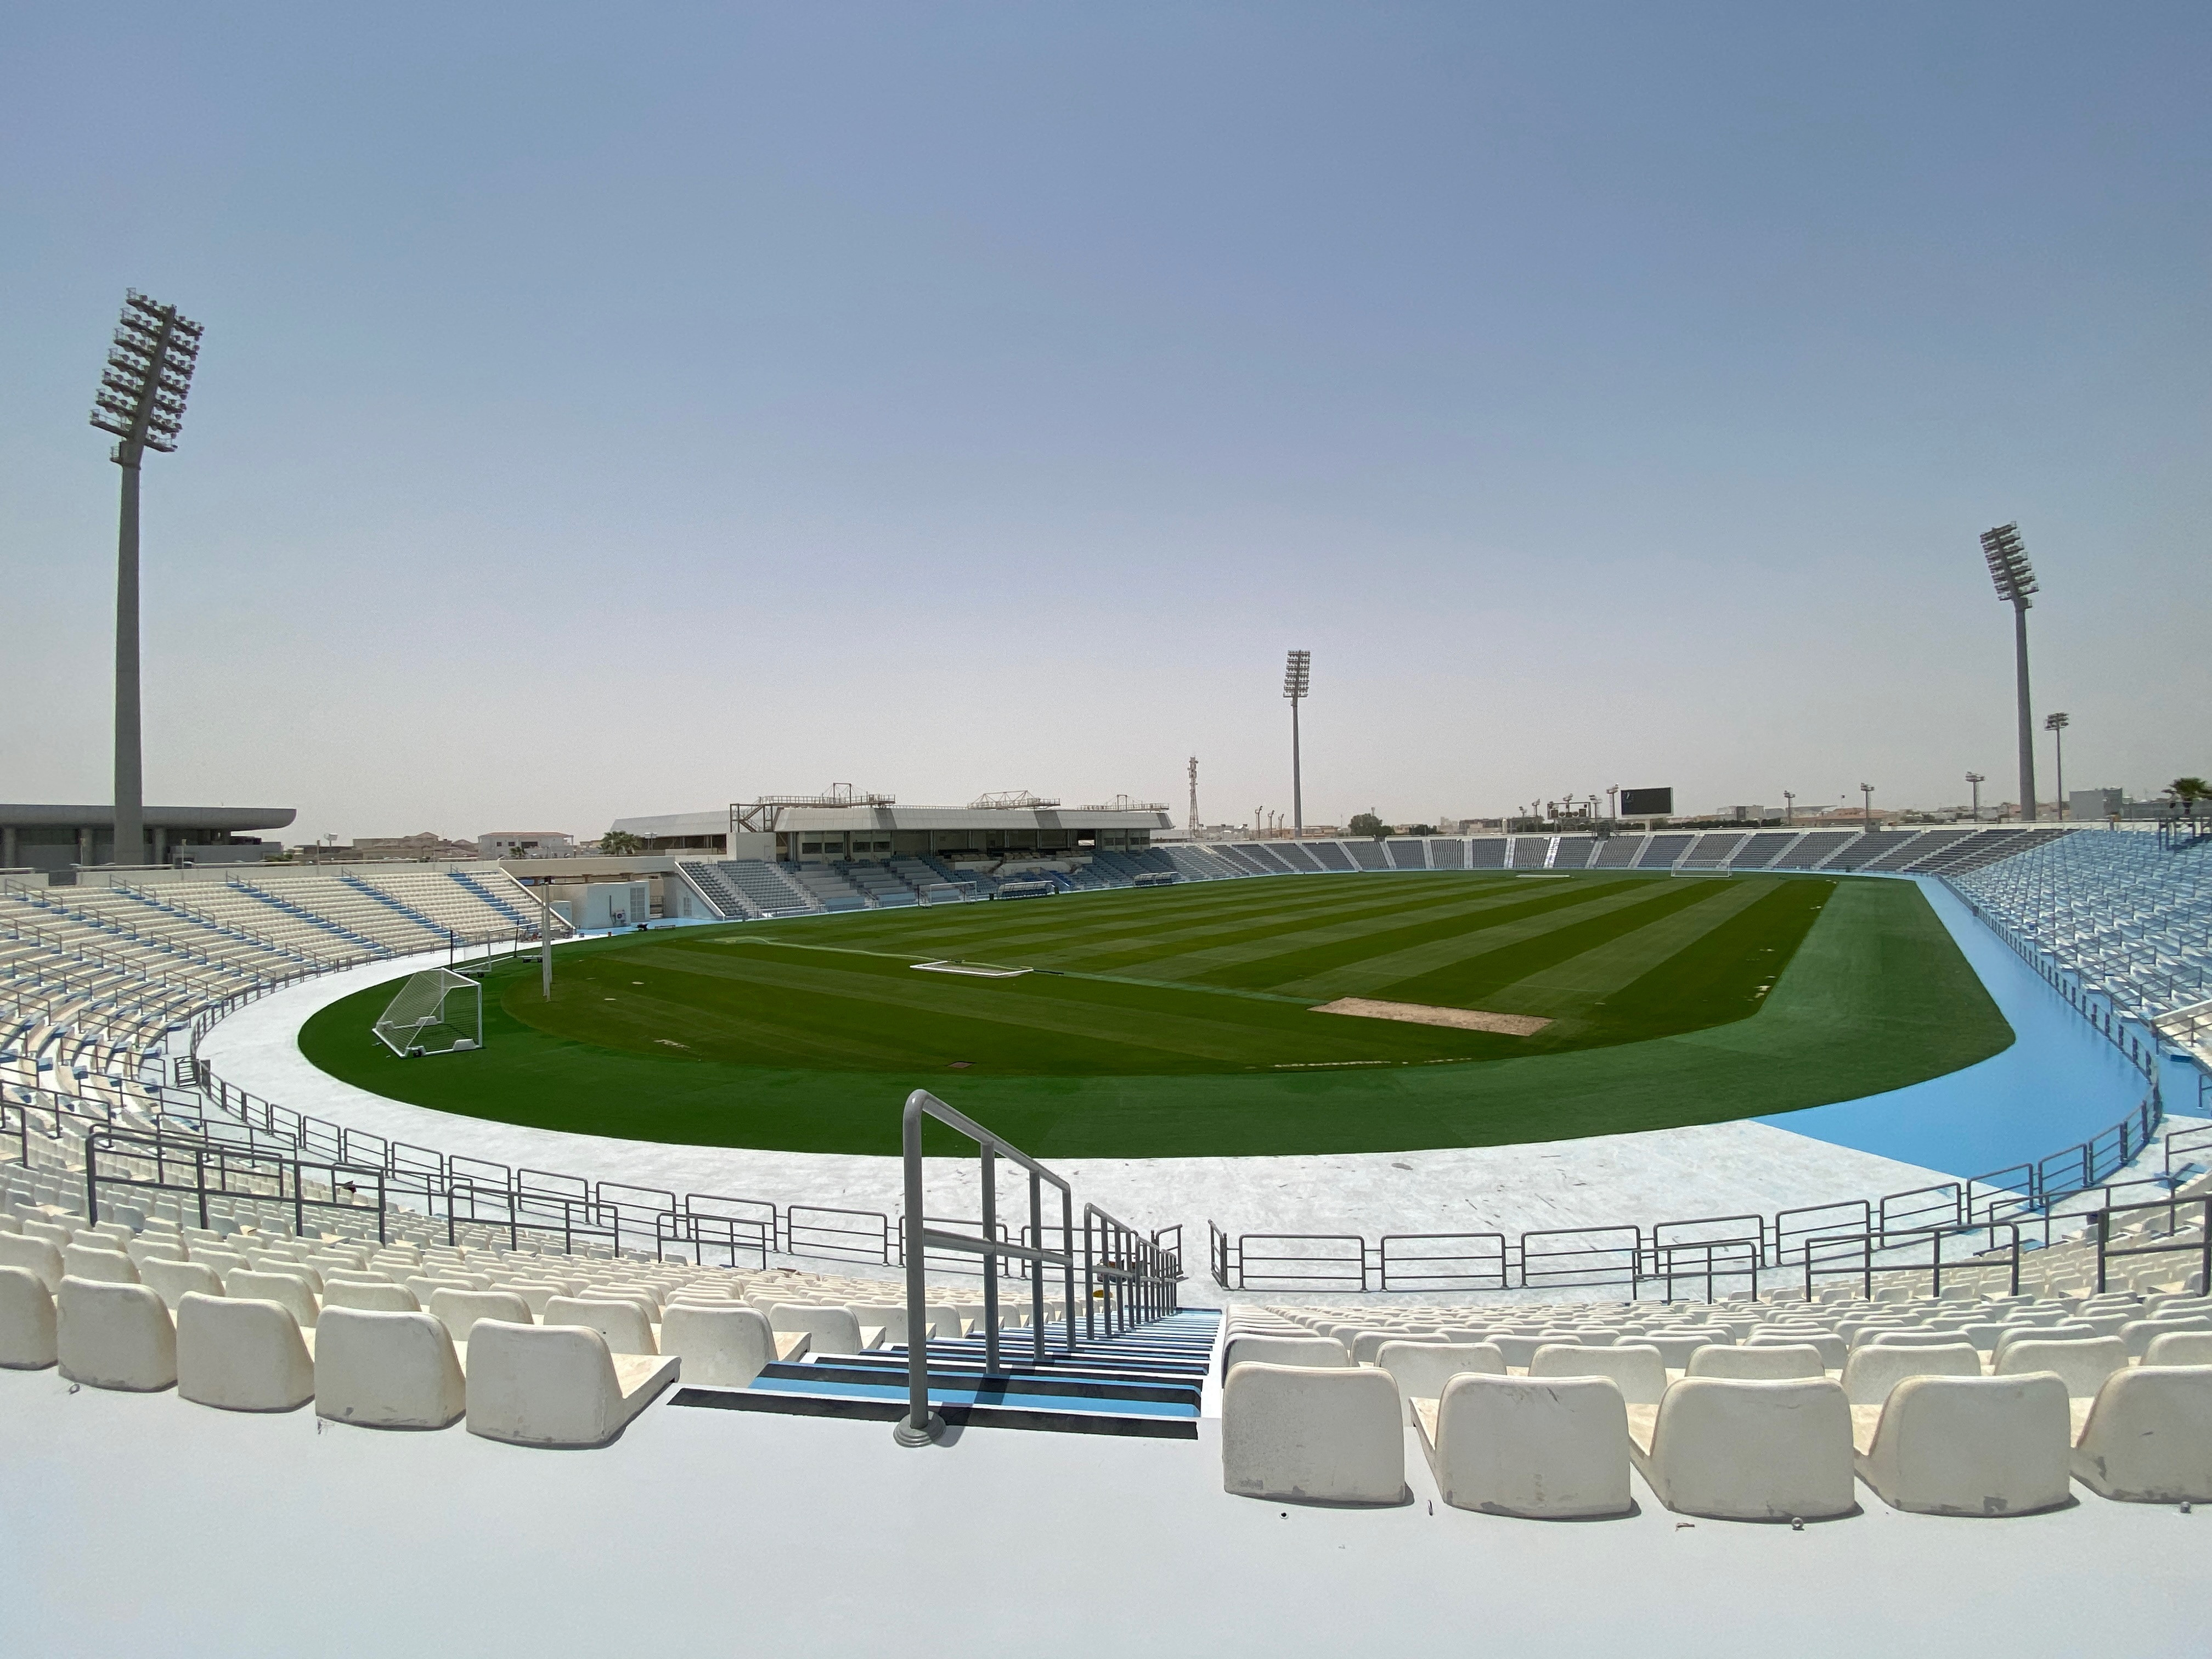 General view of Al Wakrah Sports Complex Stadium which will be used by England's team for the FIFA World Cup Qatar 2022, Doha, Qatar